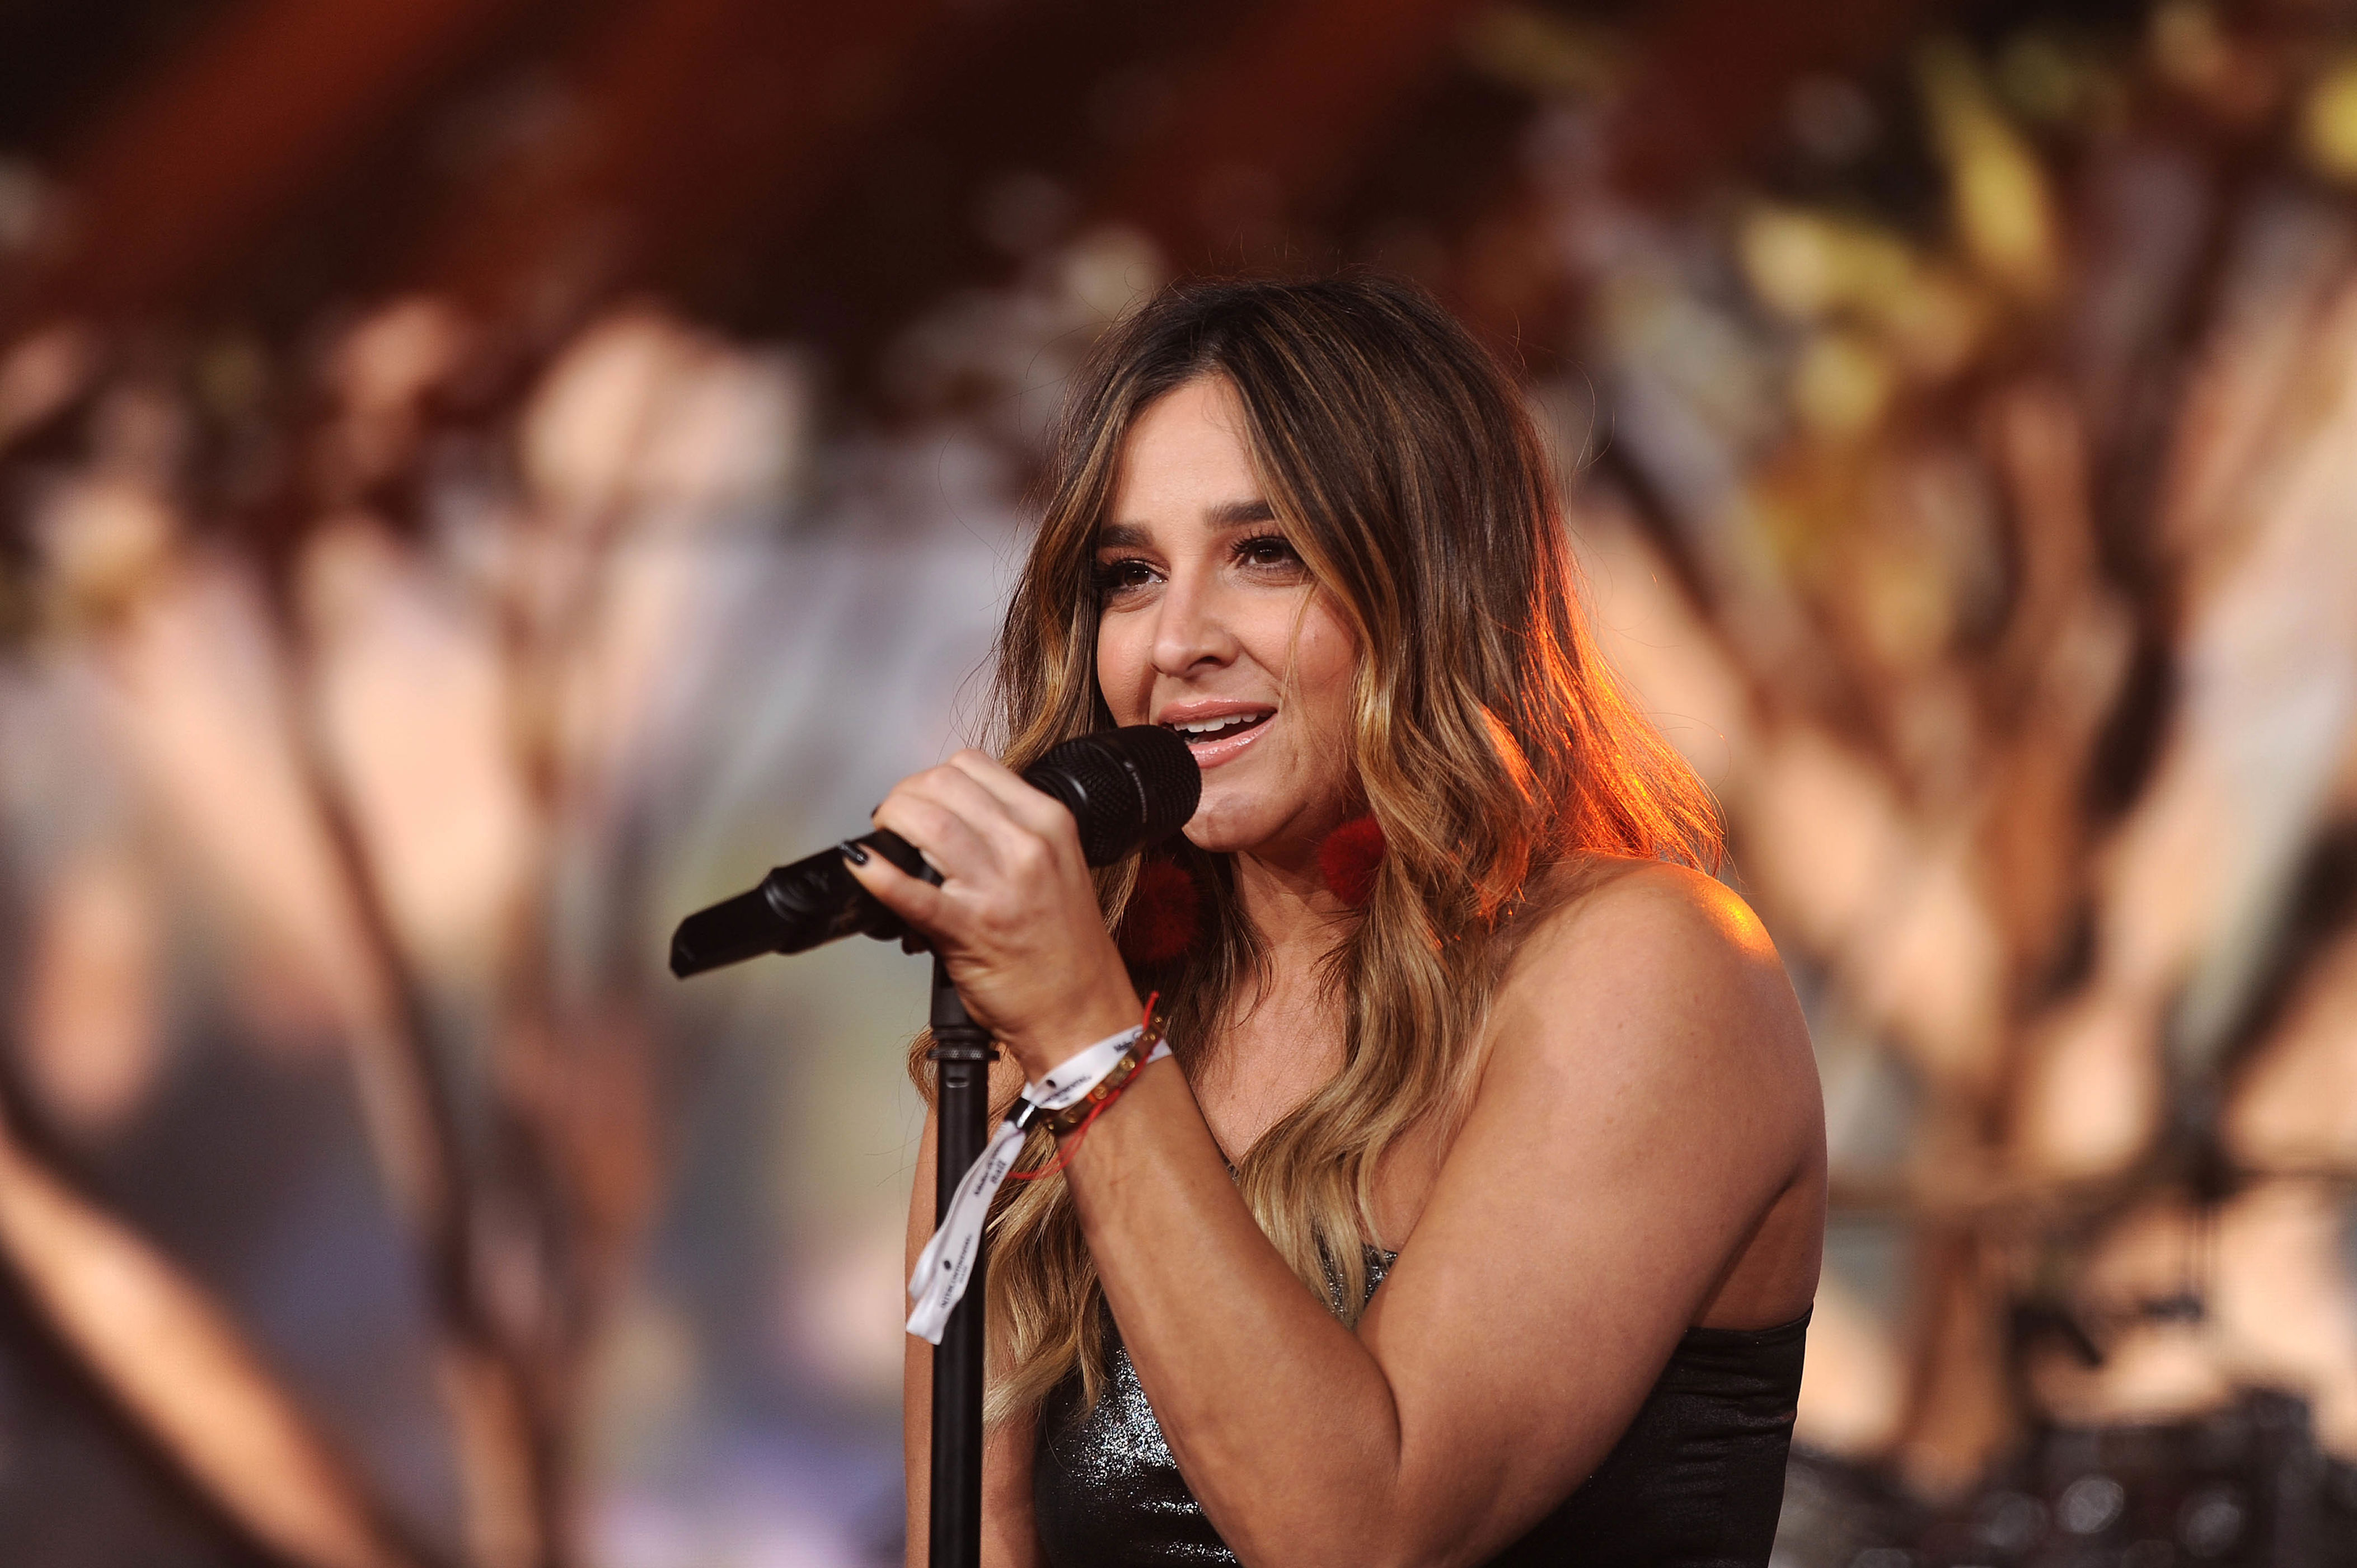 <p>Though Alisan Porter has appeared on screen just a handful of times since she starred as "Curly Sue" in 1991, she's enjoyed some success as a stage actress: She originated the role of Miriam in "The Ten Commandments: The Musical" alongside Val Kilmer and Adam Lambert in Los Angeles in 2004 and appeared in the Broadway revival of "A Chorus Line" in 2006. Alisan, who in 2014 opened up about her struggle with alcoholism, has also released several albums over the years including the 2014 solo effort "Who We Are." In 2016, she competed on NBC's "The Voice," earning a spot on Christina Aguilera's team and eventually winning season 10. She later headlined the Las Vegas show "The Voice: Neon Dreams" with other "The Voice" stars. In 2012, she married Brian Autenrieth, with whom she shares son Mason Blaise and daughter Aria. The two announced their split in 2017. In 2023, she married childhood friend Justin de Vera, a professional dancer with whom she welcomed daughter Shilo in 2021. </p>